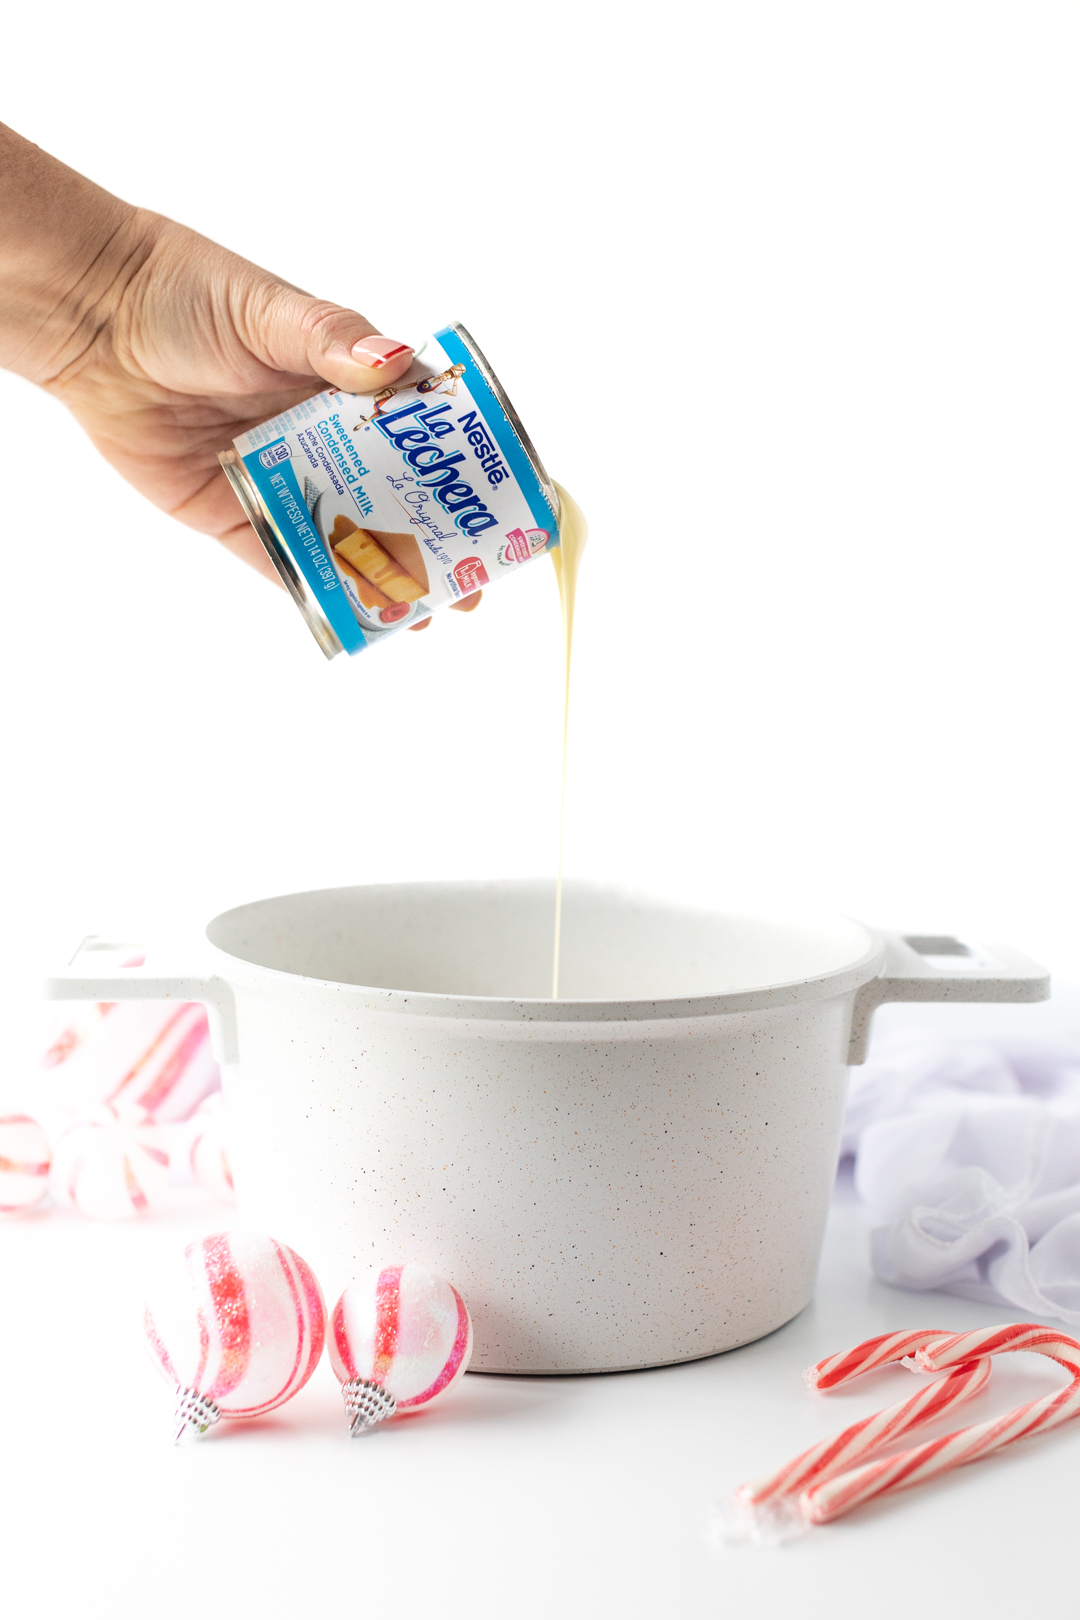 woman pouring can of la lechera sweetened condensed milk into a sauce pan.